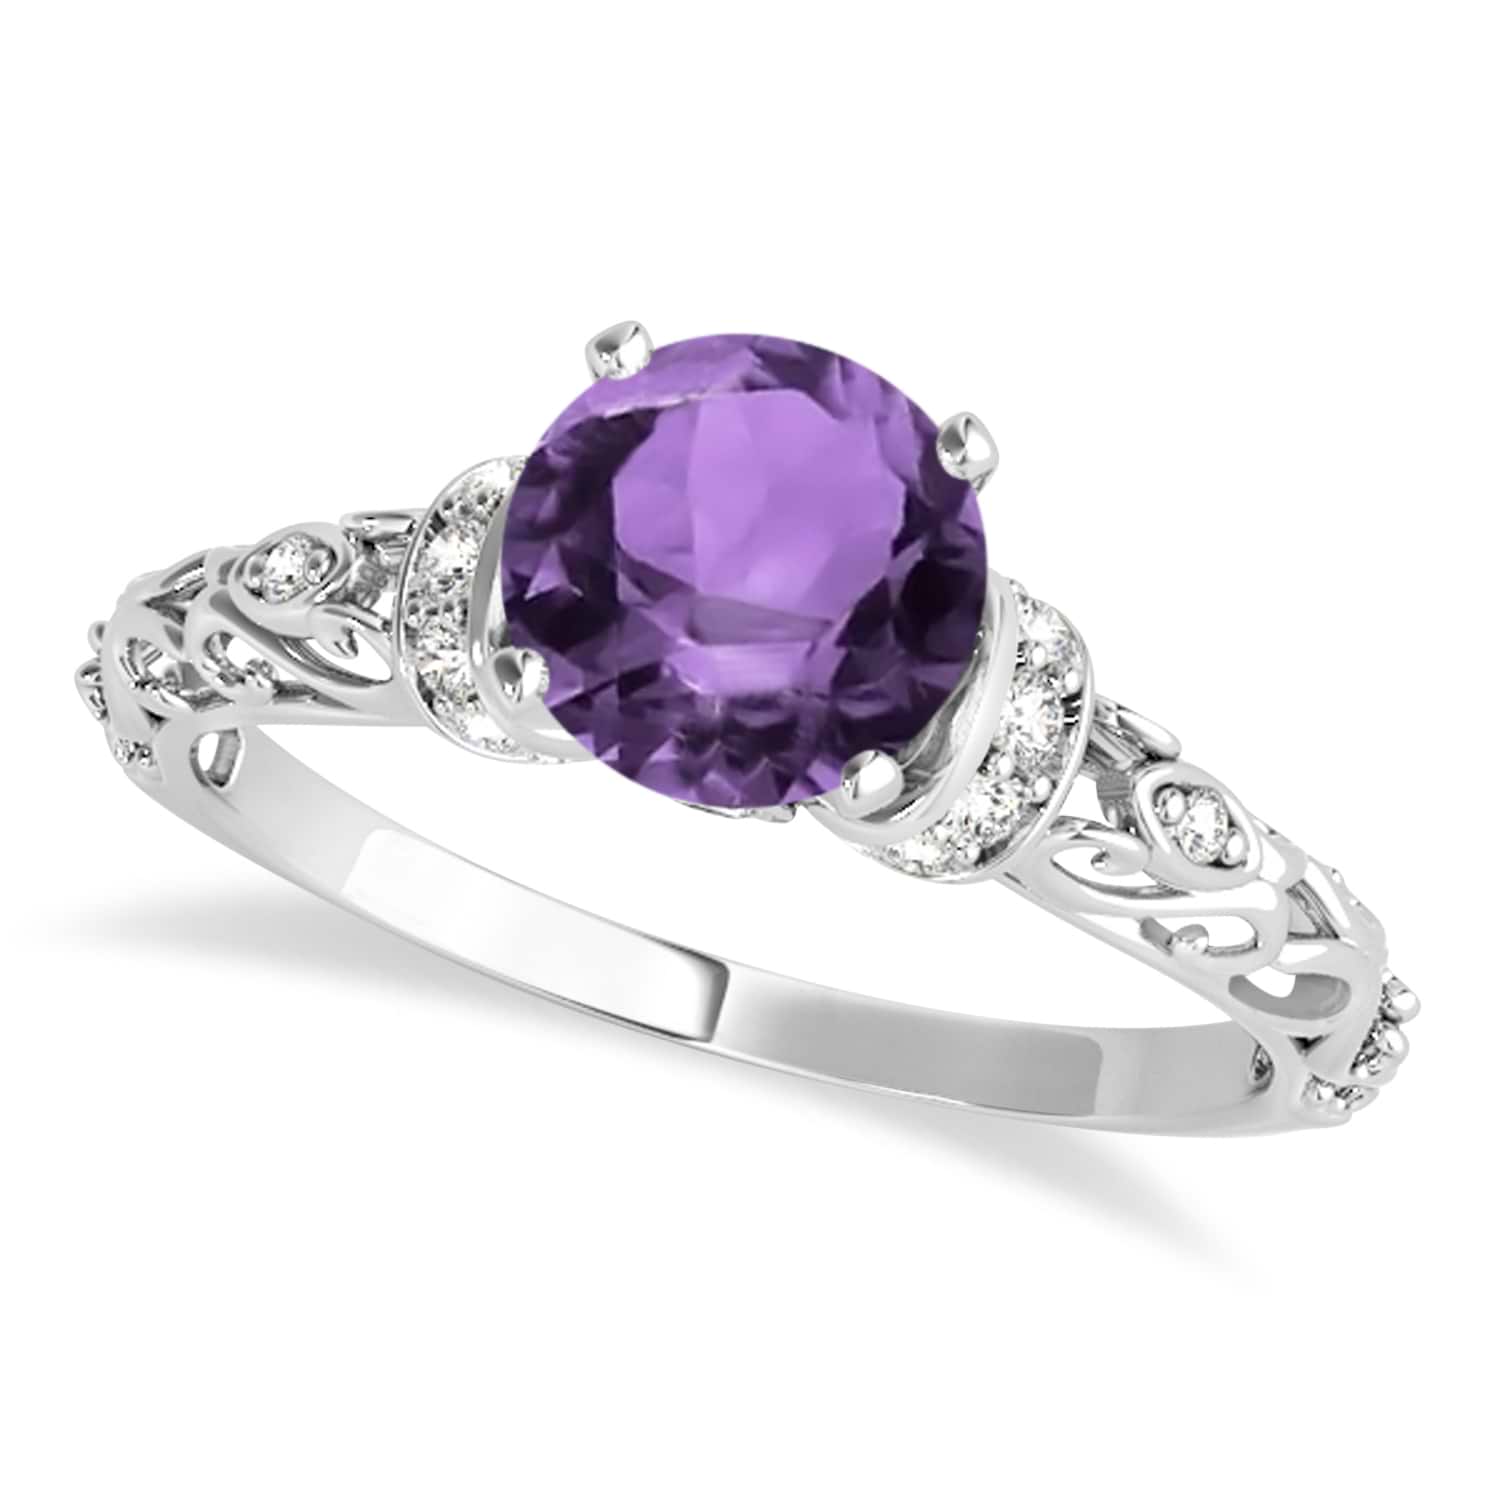 Amethyst & Diamond Antique Style Engagement Ring 18k White Gold (1.12ct)